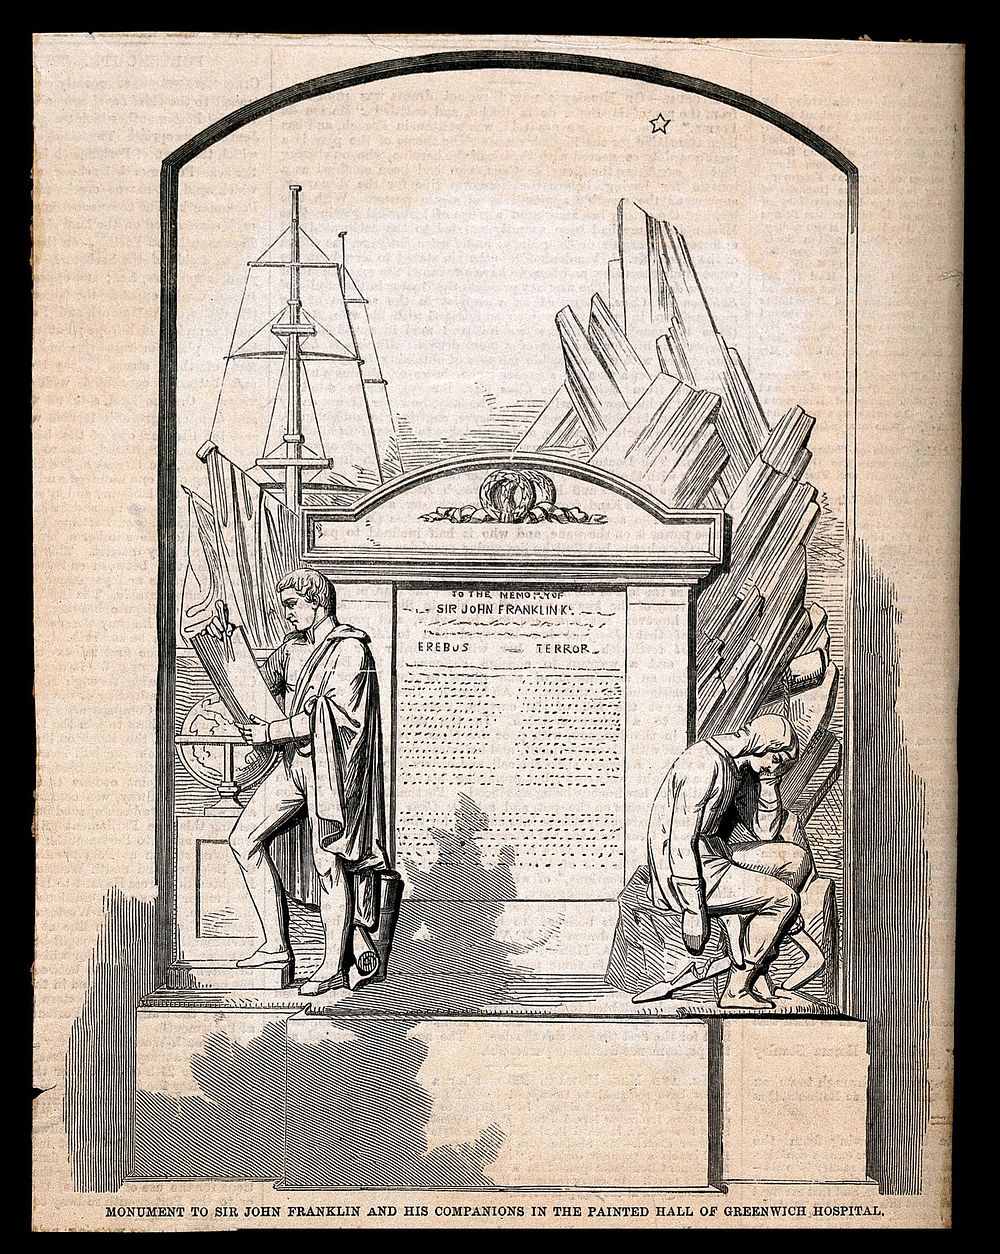 Monument to Sir John Franklin in the Painted Hall at Greenwich Hospital. Wood engraving after R. Westmacott, 1859.